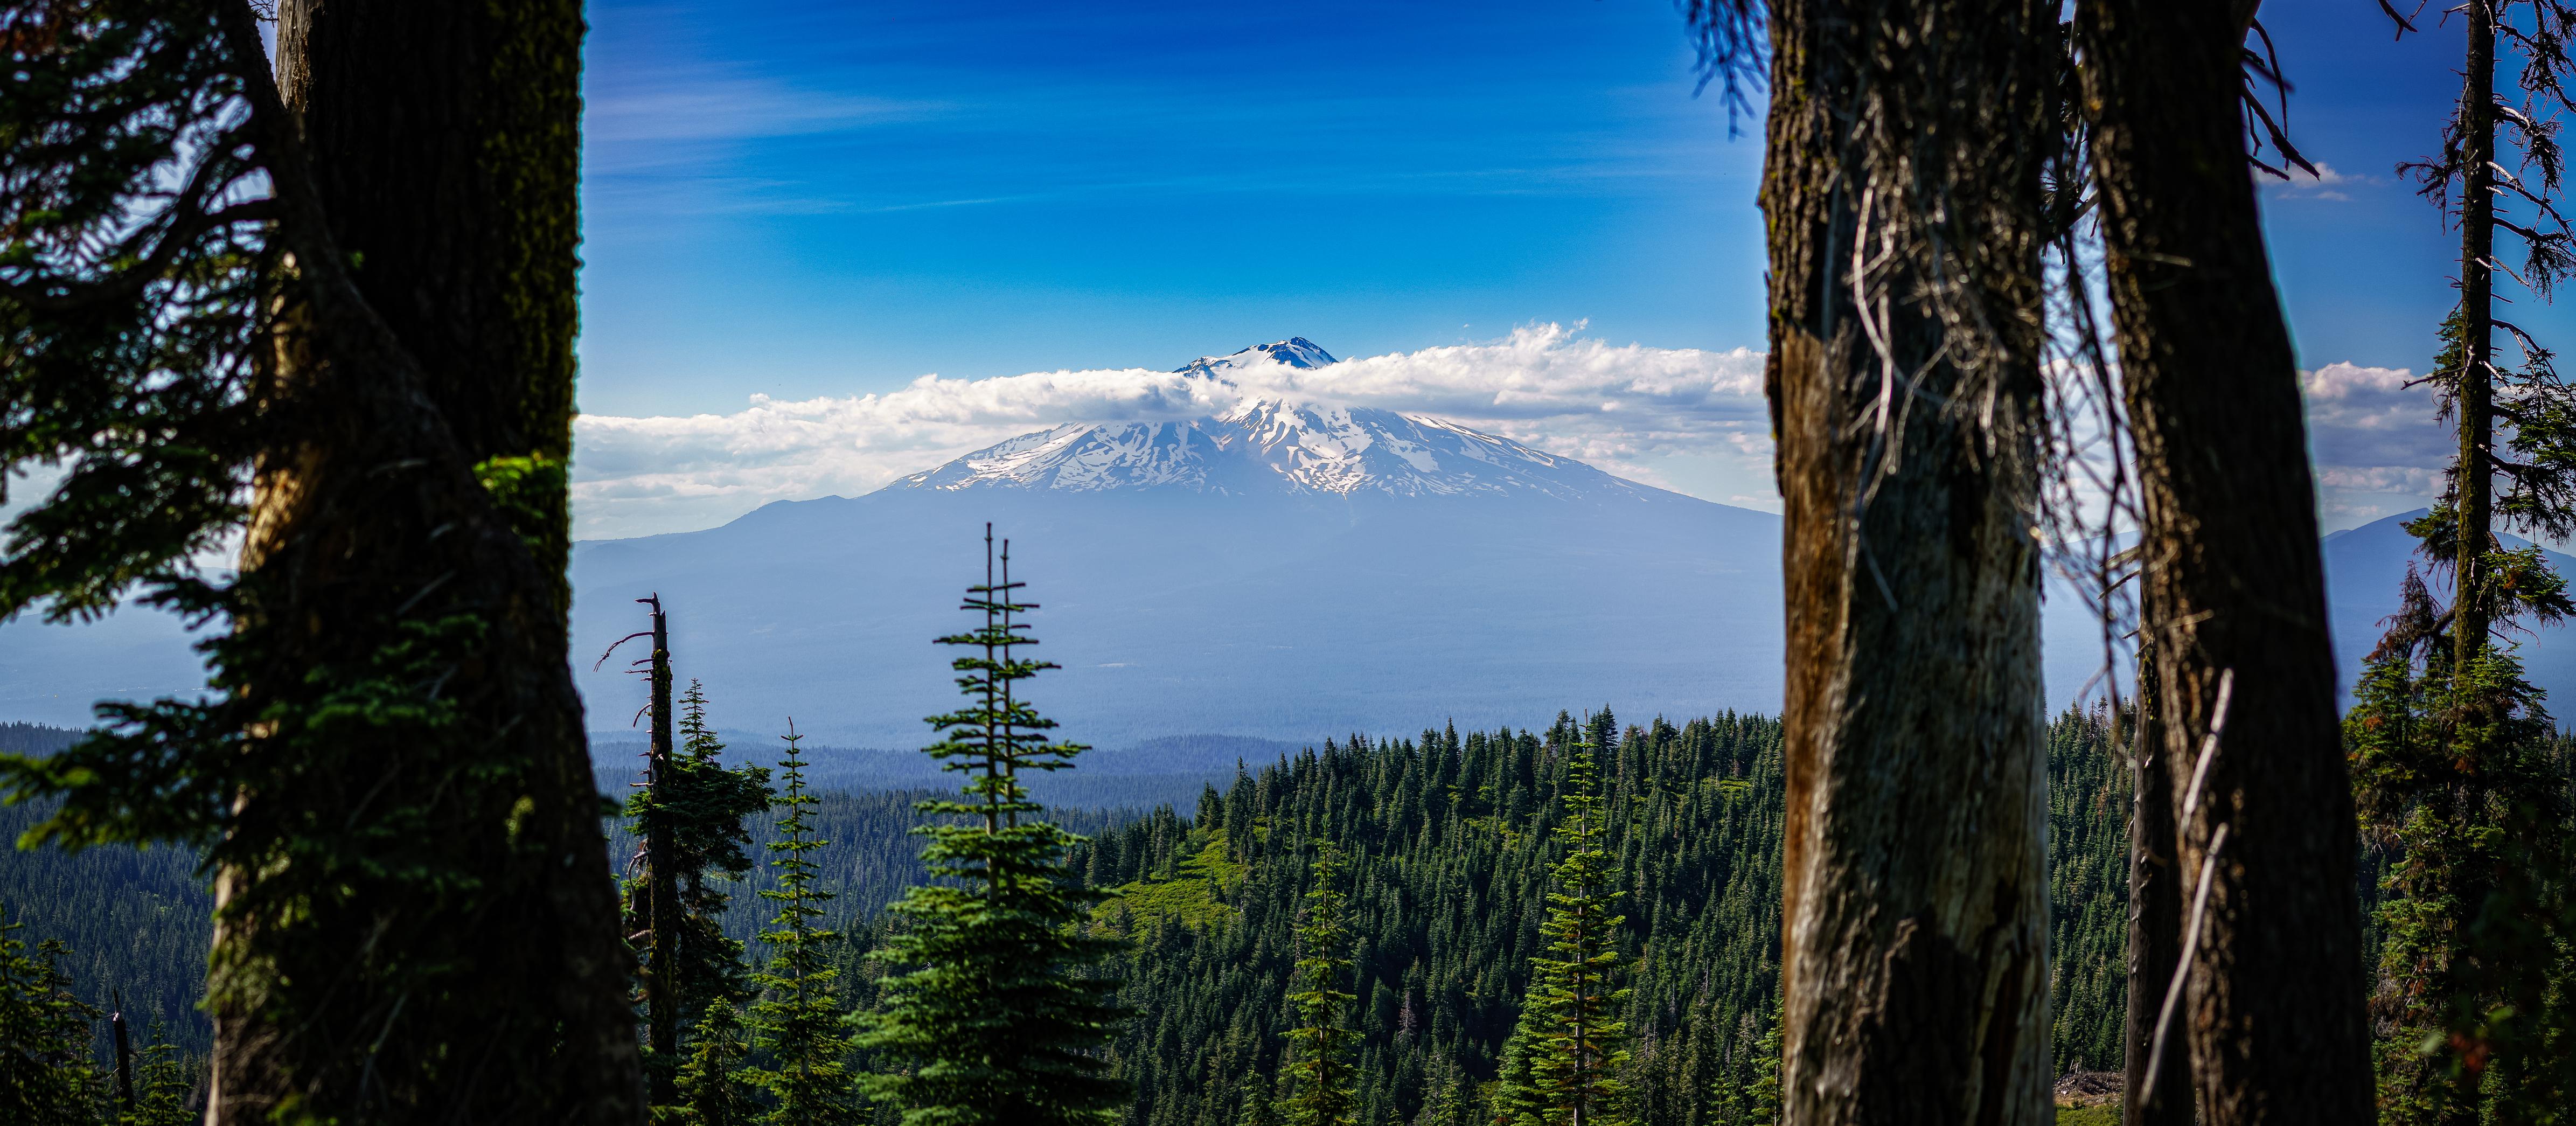 Forest Nature Landscape California USA Mount Shasta Trees Clouds Mountains 4782x2090